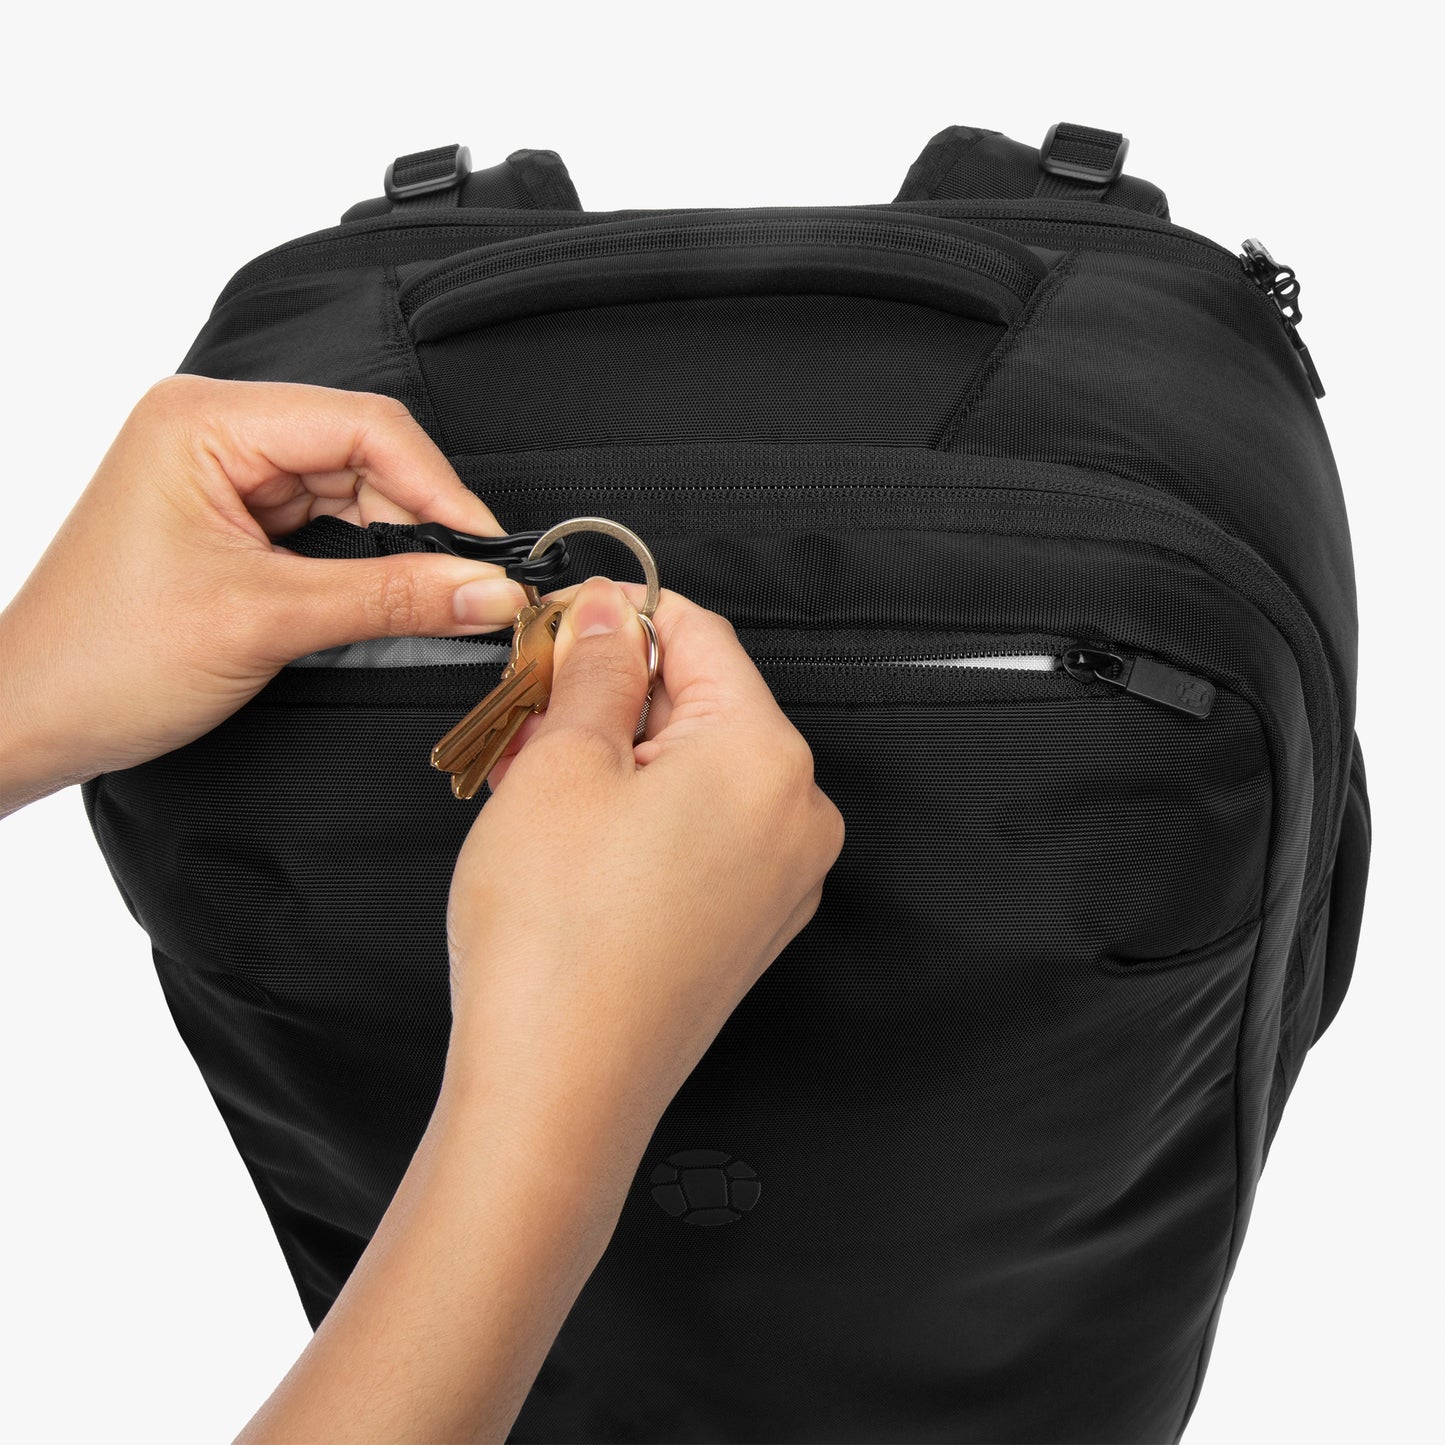 Quick access top pocket with key clip